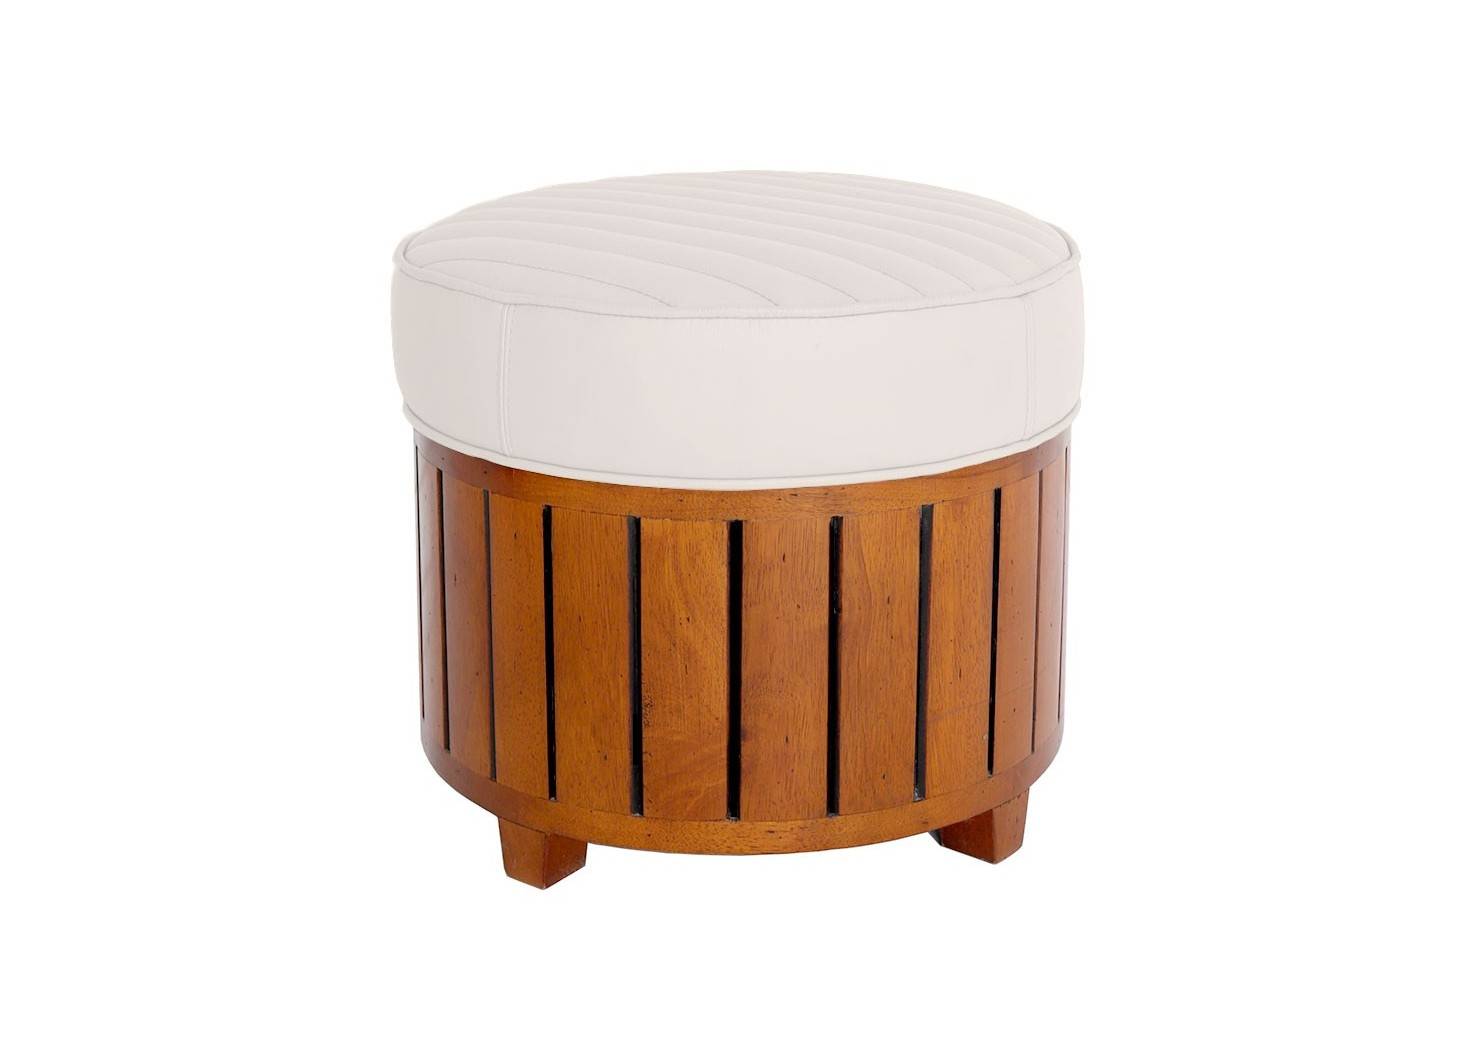 Canoë round footstool - white leather